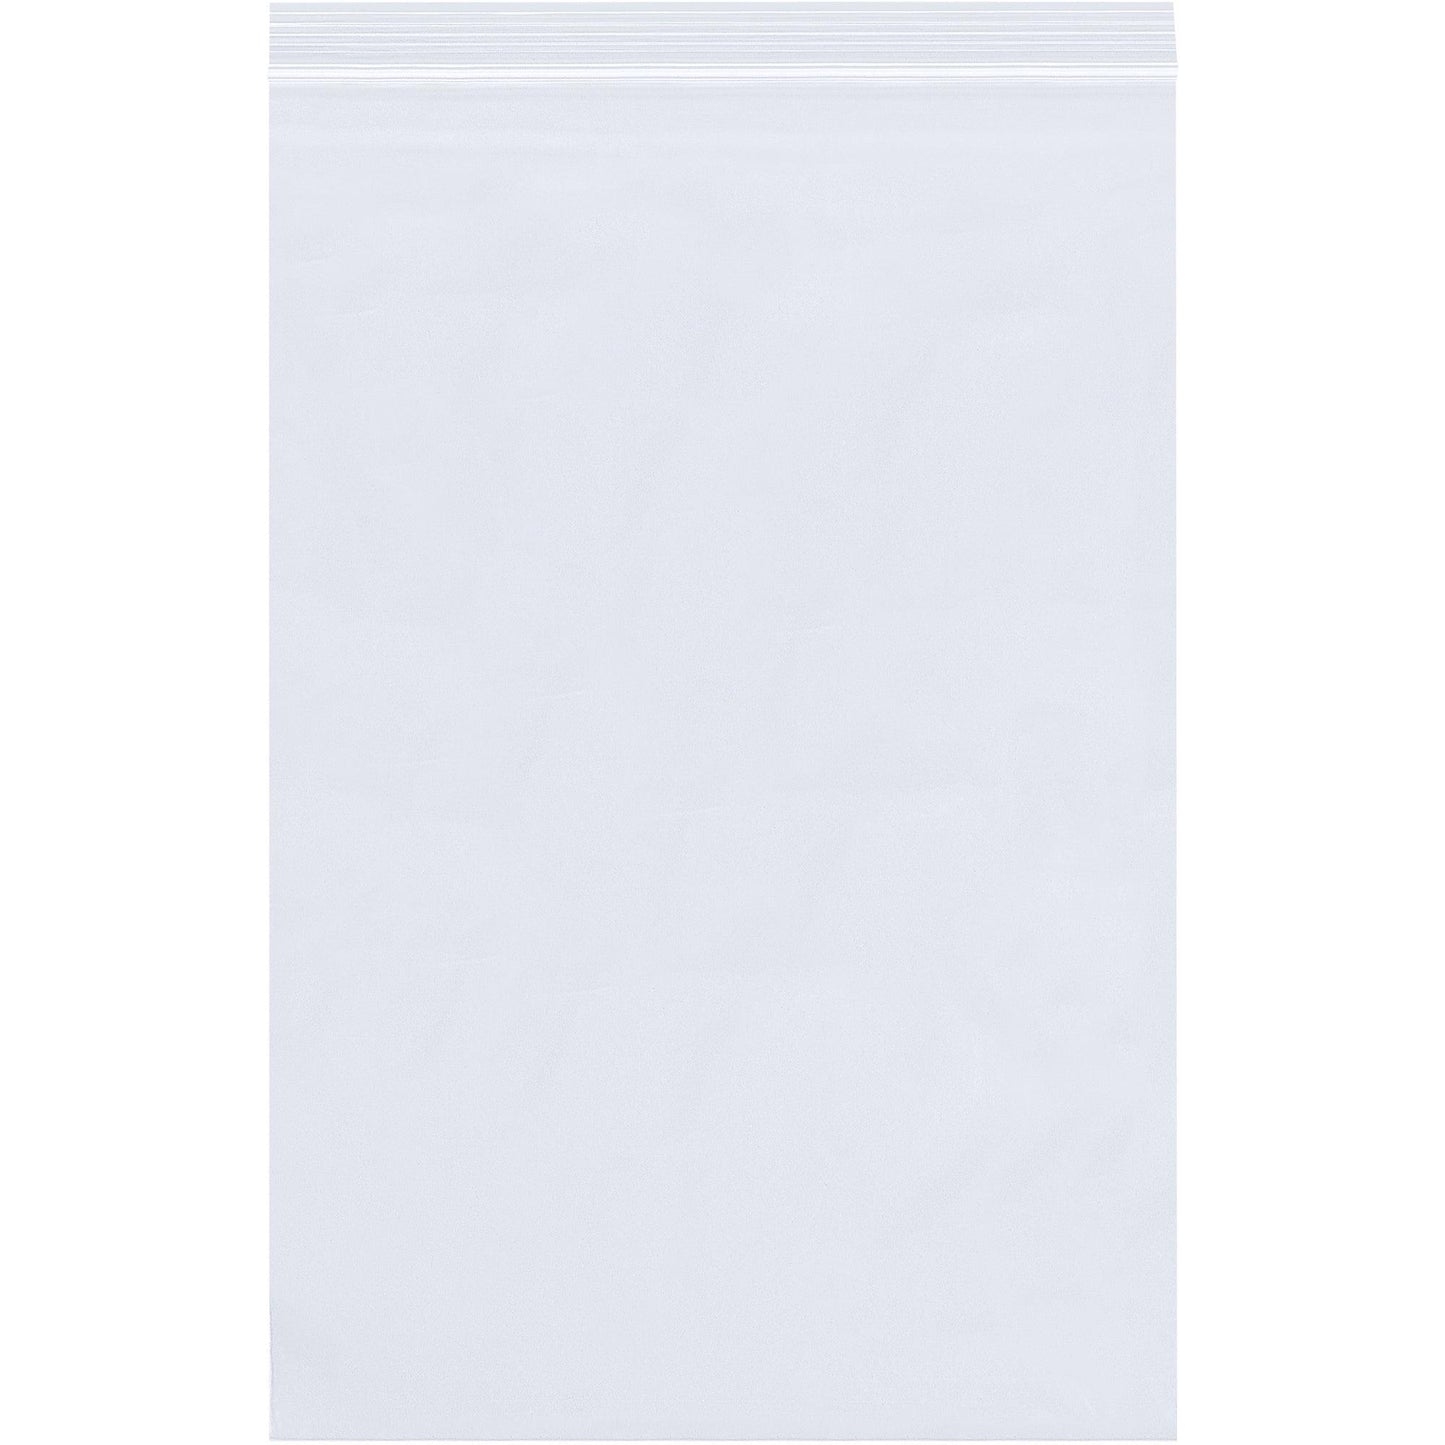 5 x 14" - 2 Mil Reclosable Poly Bags - PB3774